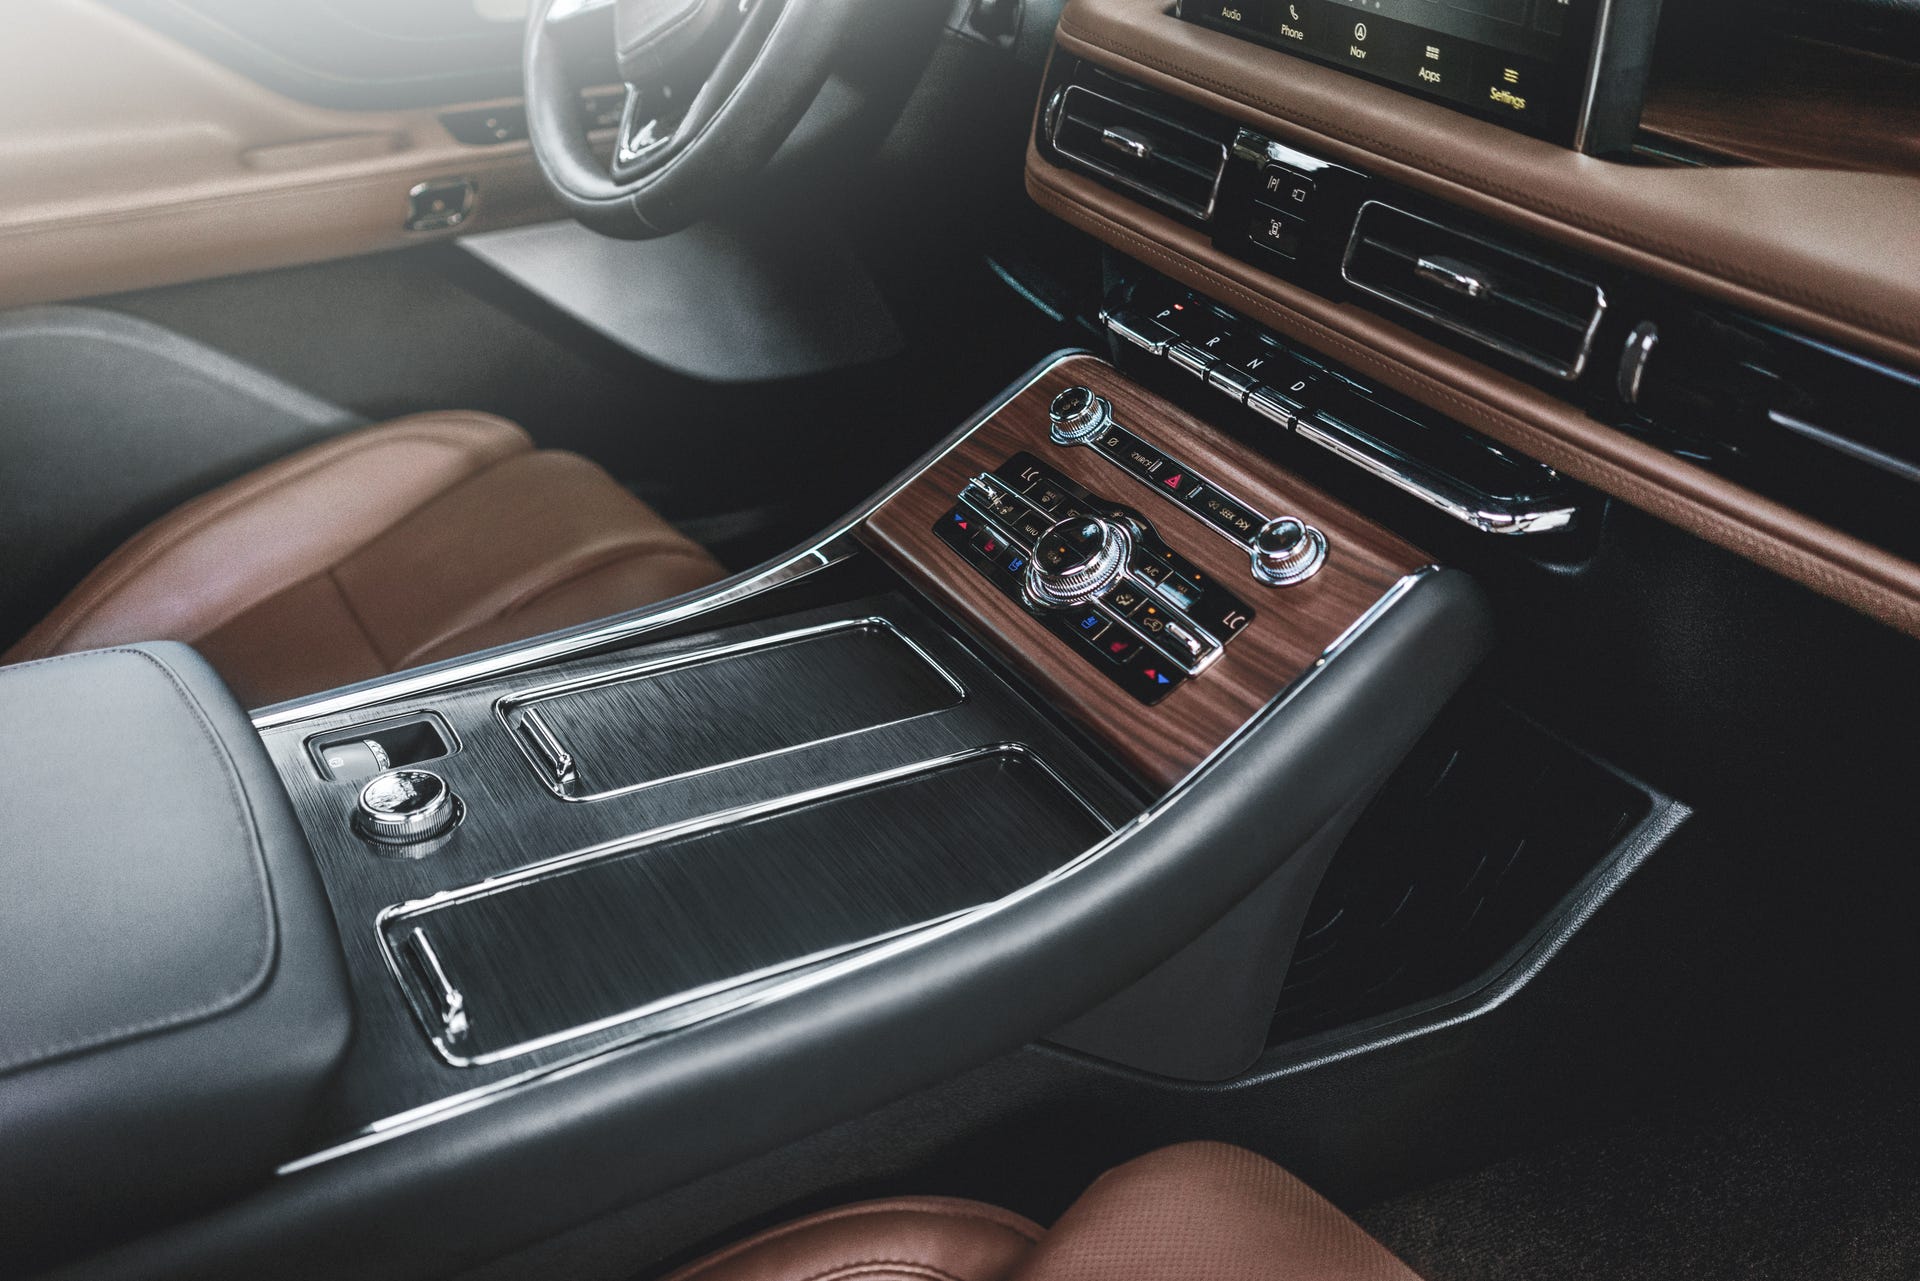 The all-new 2020 Lincoln Aviator has a 12.3-inch, fully digital instrument display, 10.5-inch console touchscreen, optional, signature 30-way seats, and individual rotary knobs for audio, climate control, and drive modes.